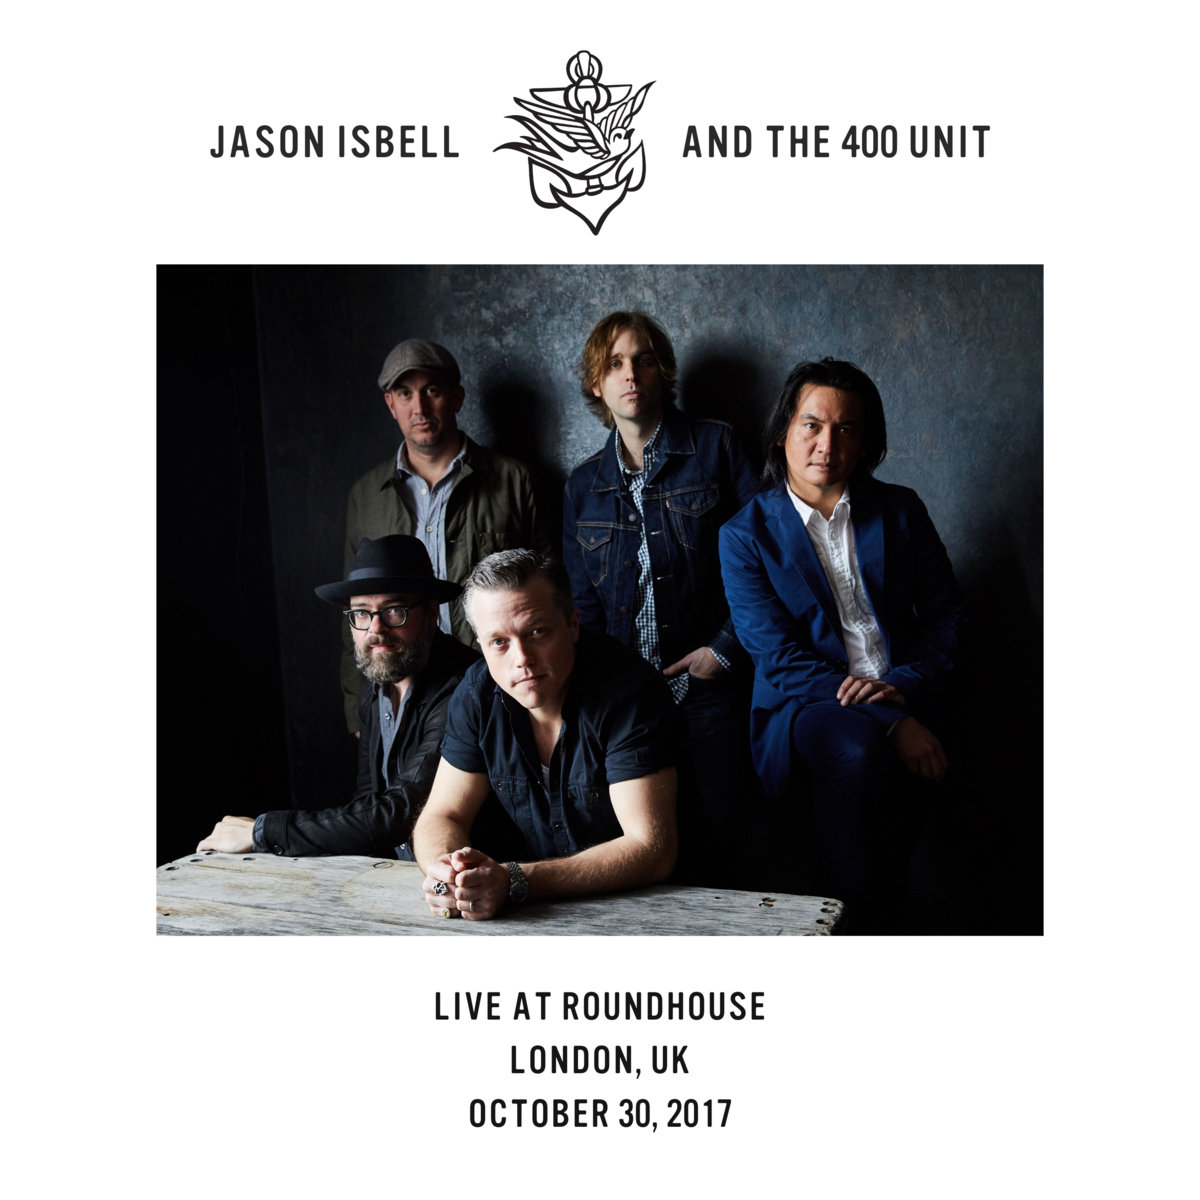 Jason Isbell And The 400 Unit - Live at Roundhouse - London, UK - 10/30/17 (2020) [FLAC 24bit/48kHz]